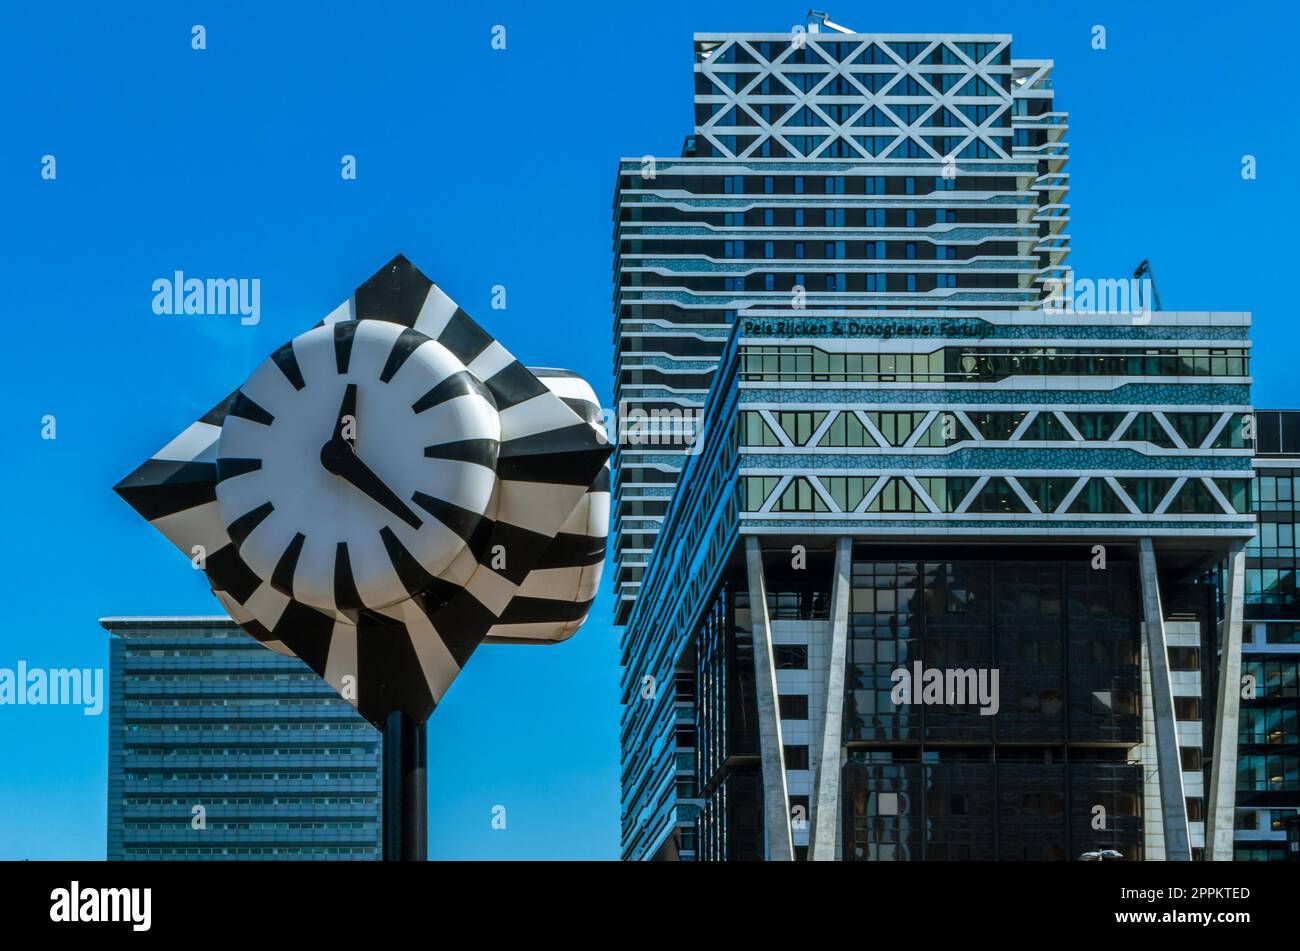 THE HAGUE, THE NETHERLANDS - AUGUST 26, 2013: The Monumental Clock, also known as the Zebra clock, is a street clock and work of public art next to Den Haag central railway station in The Hague, the Netherlands, installed in 1977 by artist Jaap Karman Stock Photo